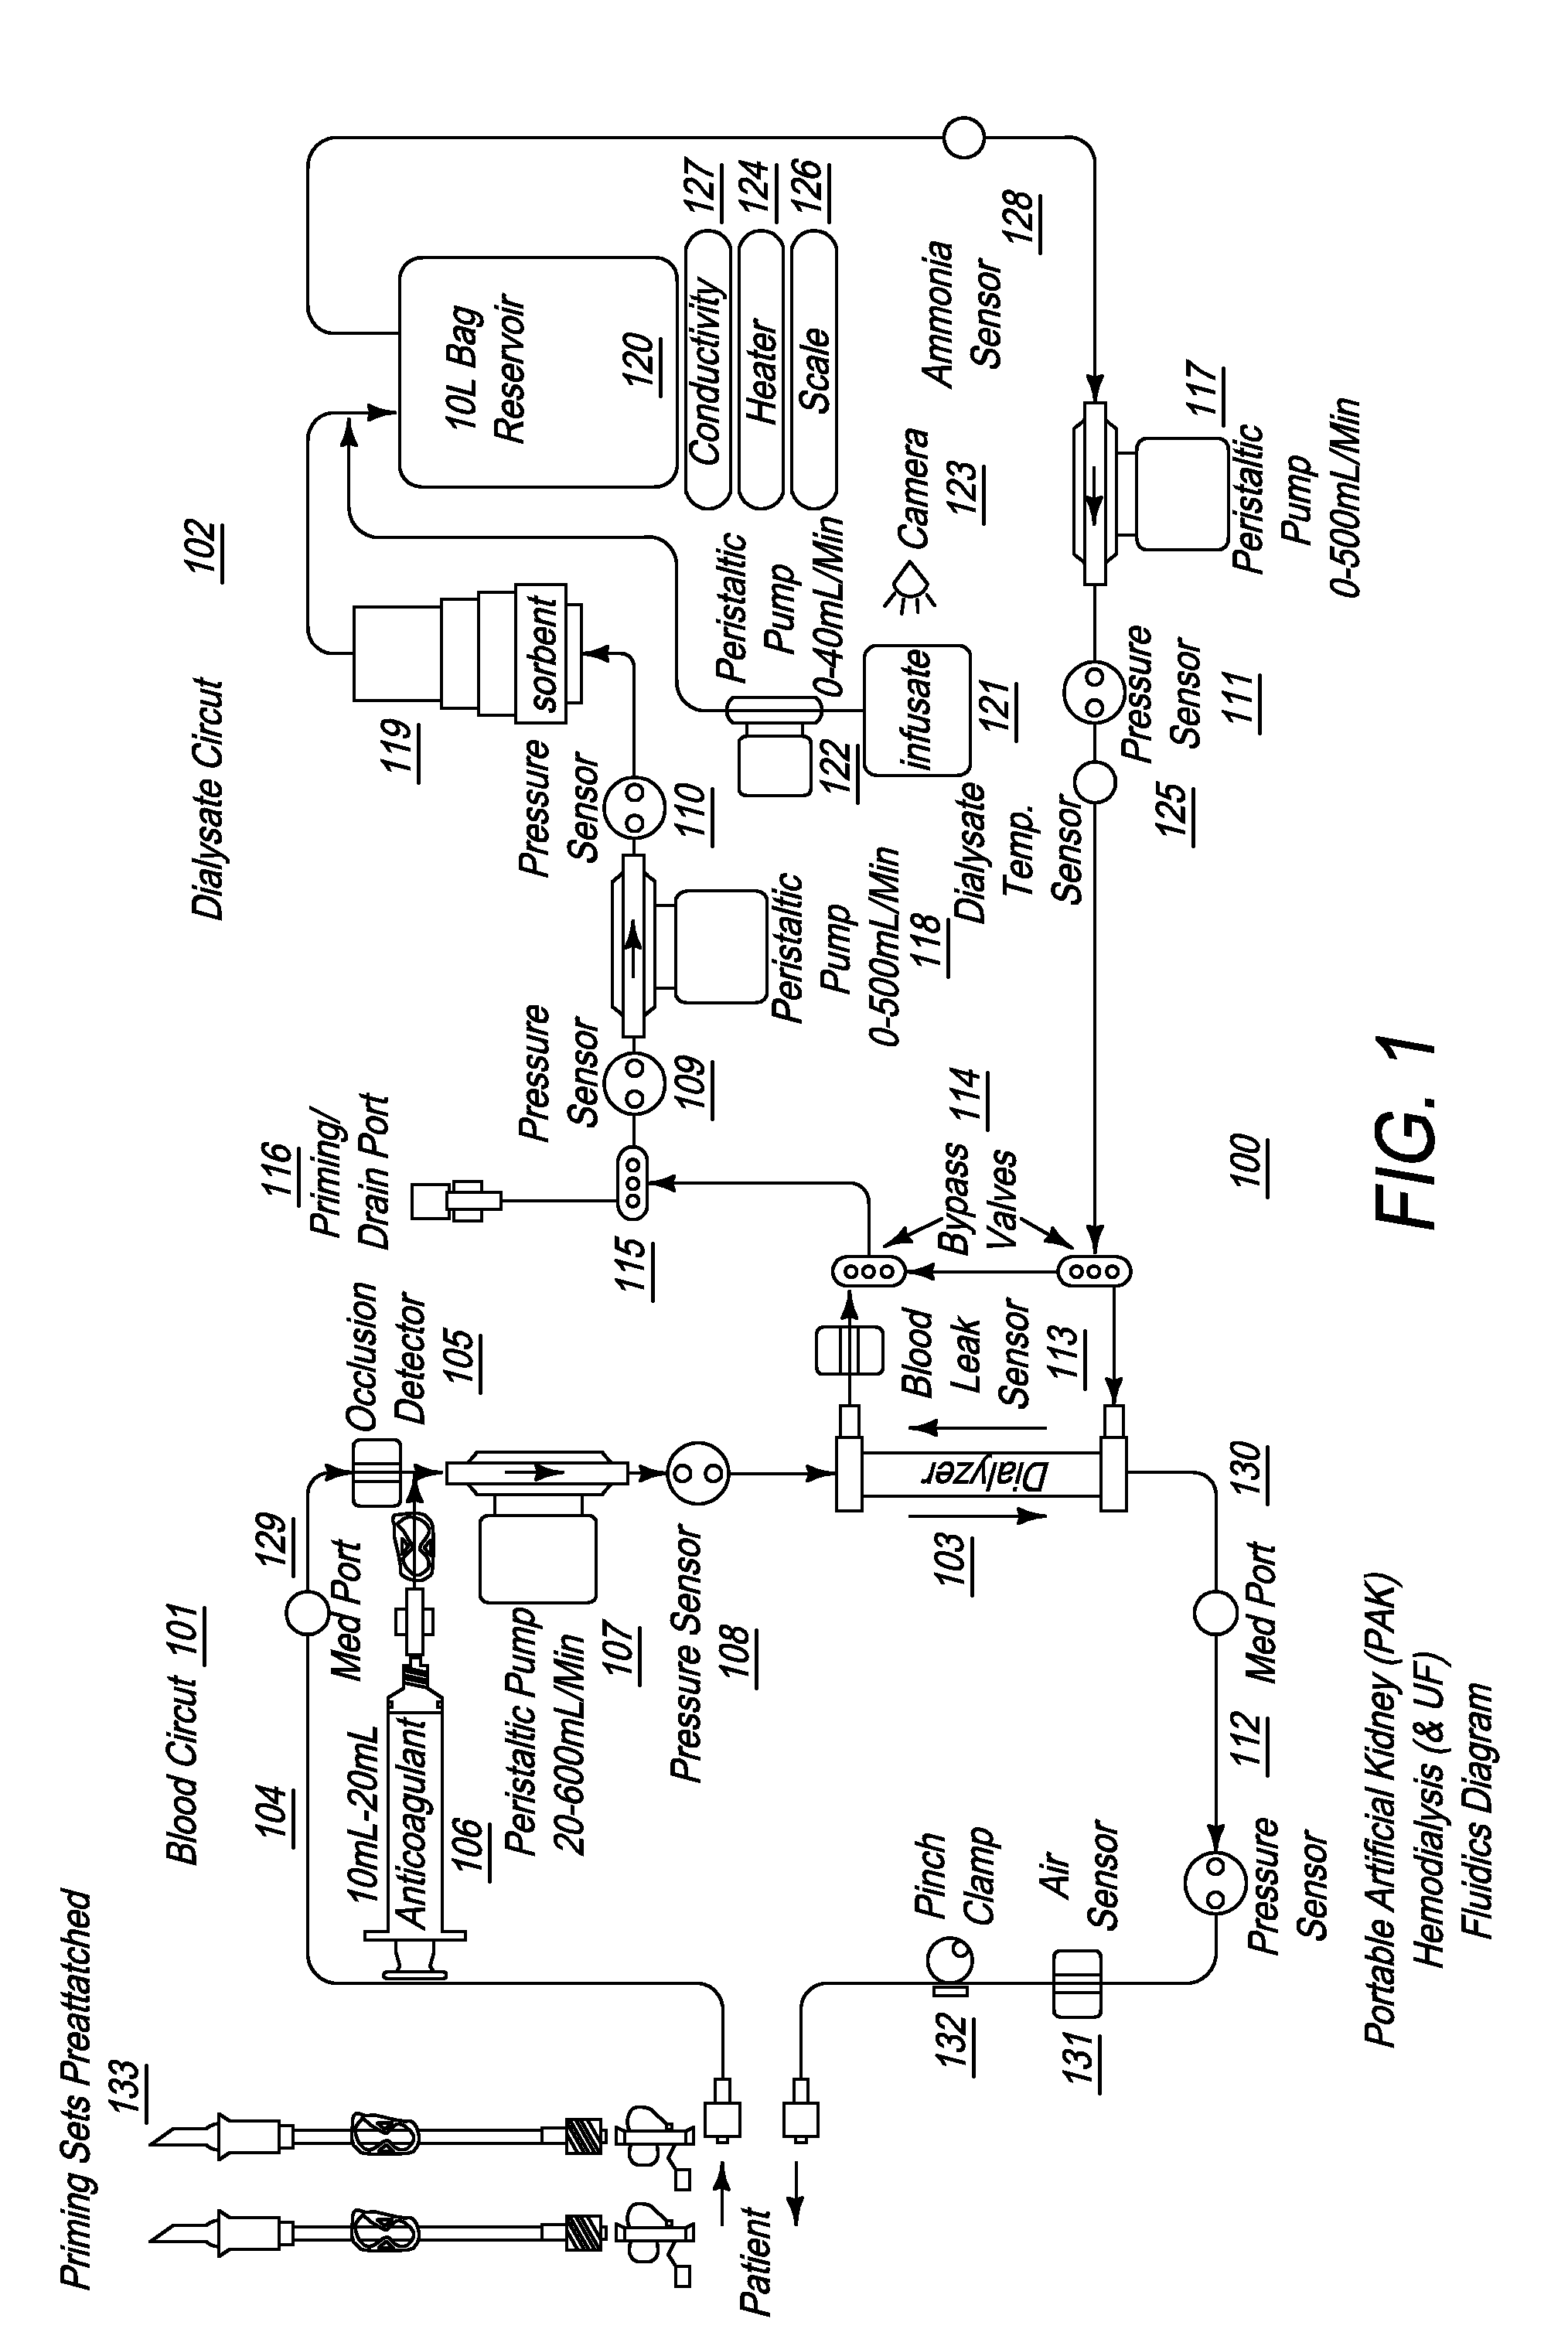 System and Method for Conducting Hemodialysis and Hemofiltration